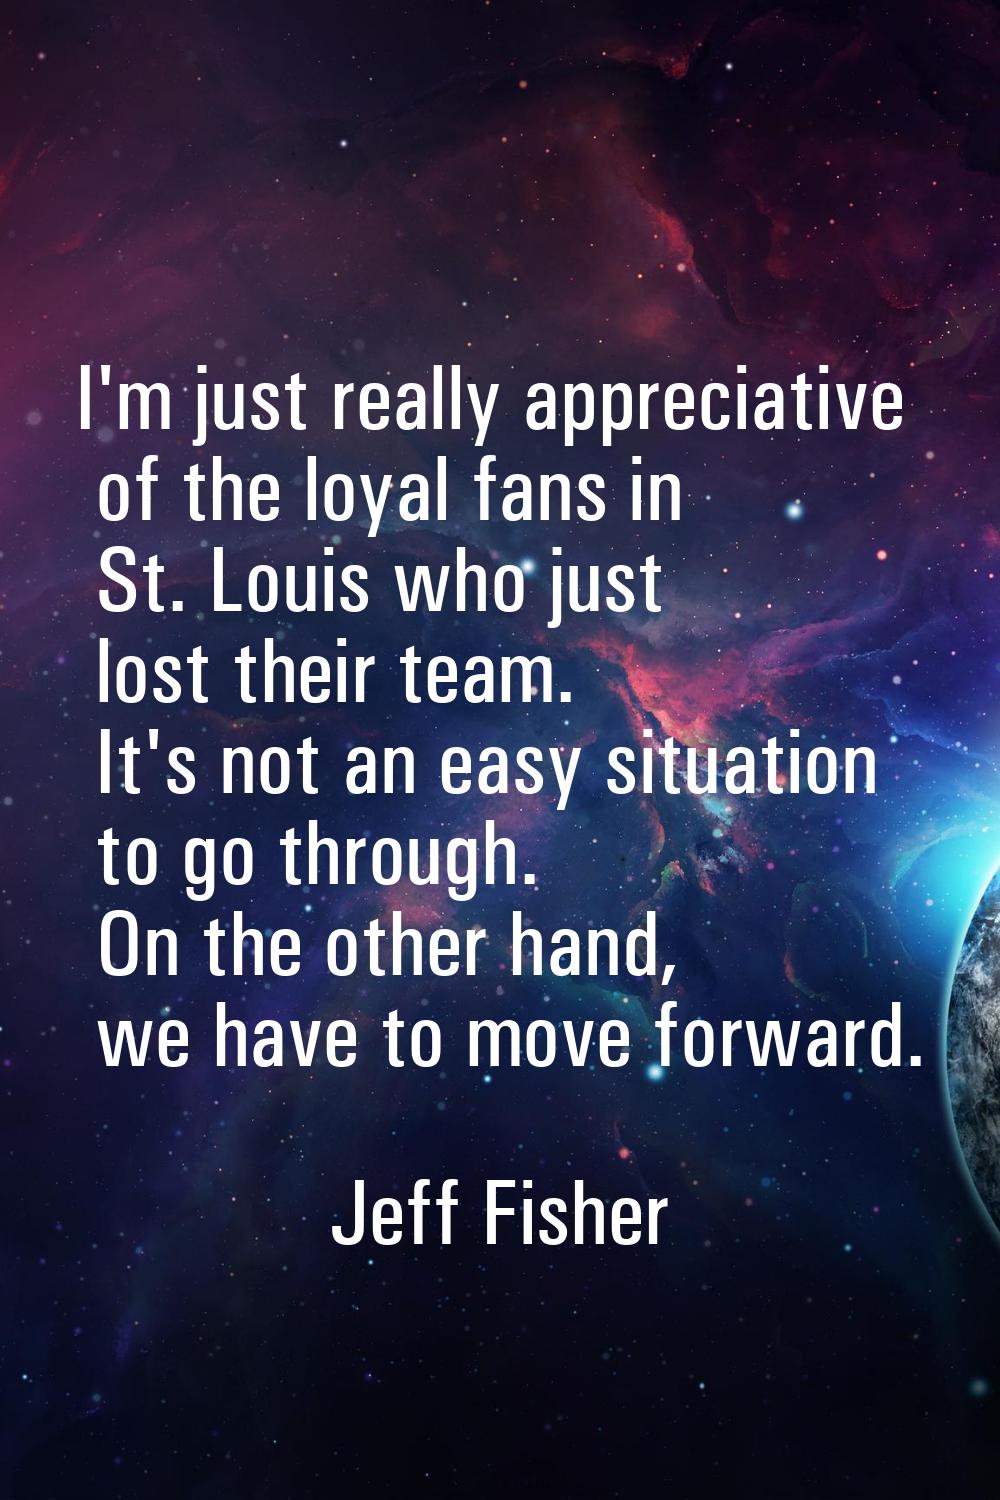 I'm just really appreciative of the loyal fans in St. Louis who just lost their team. It's not an e